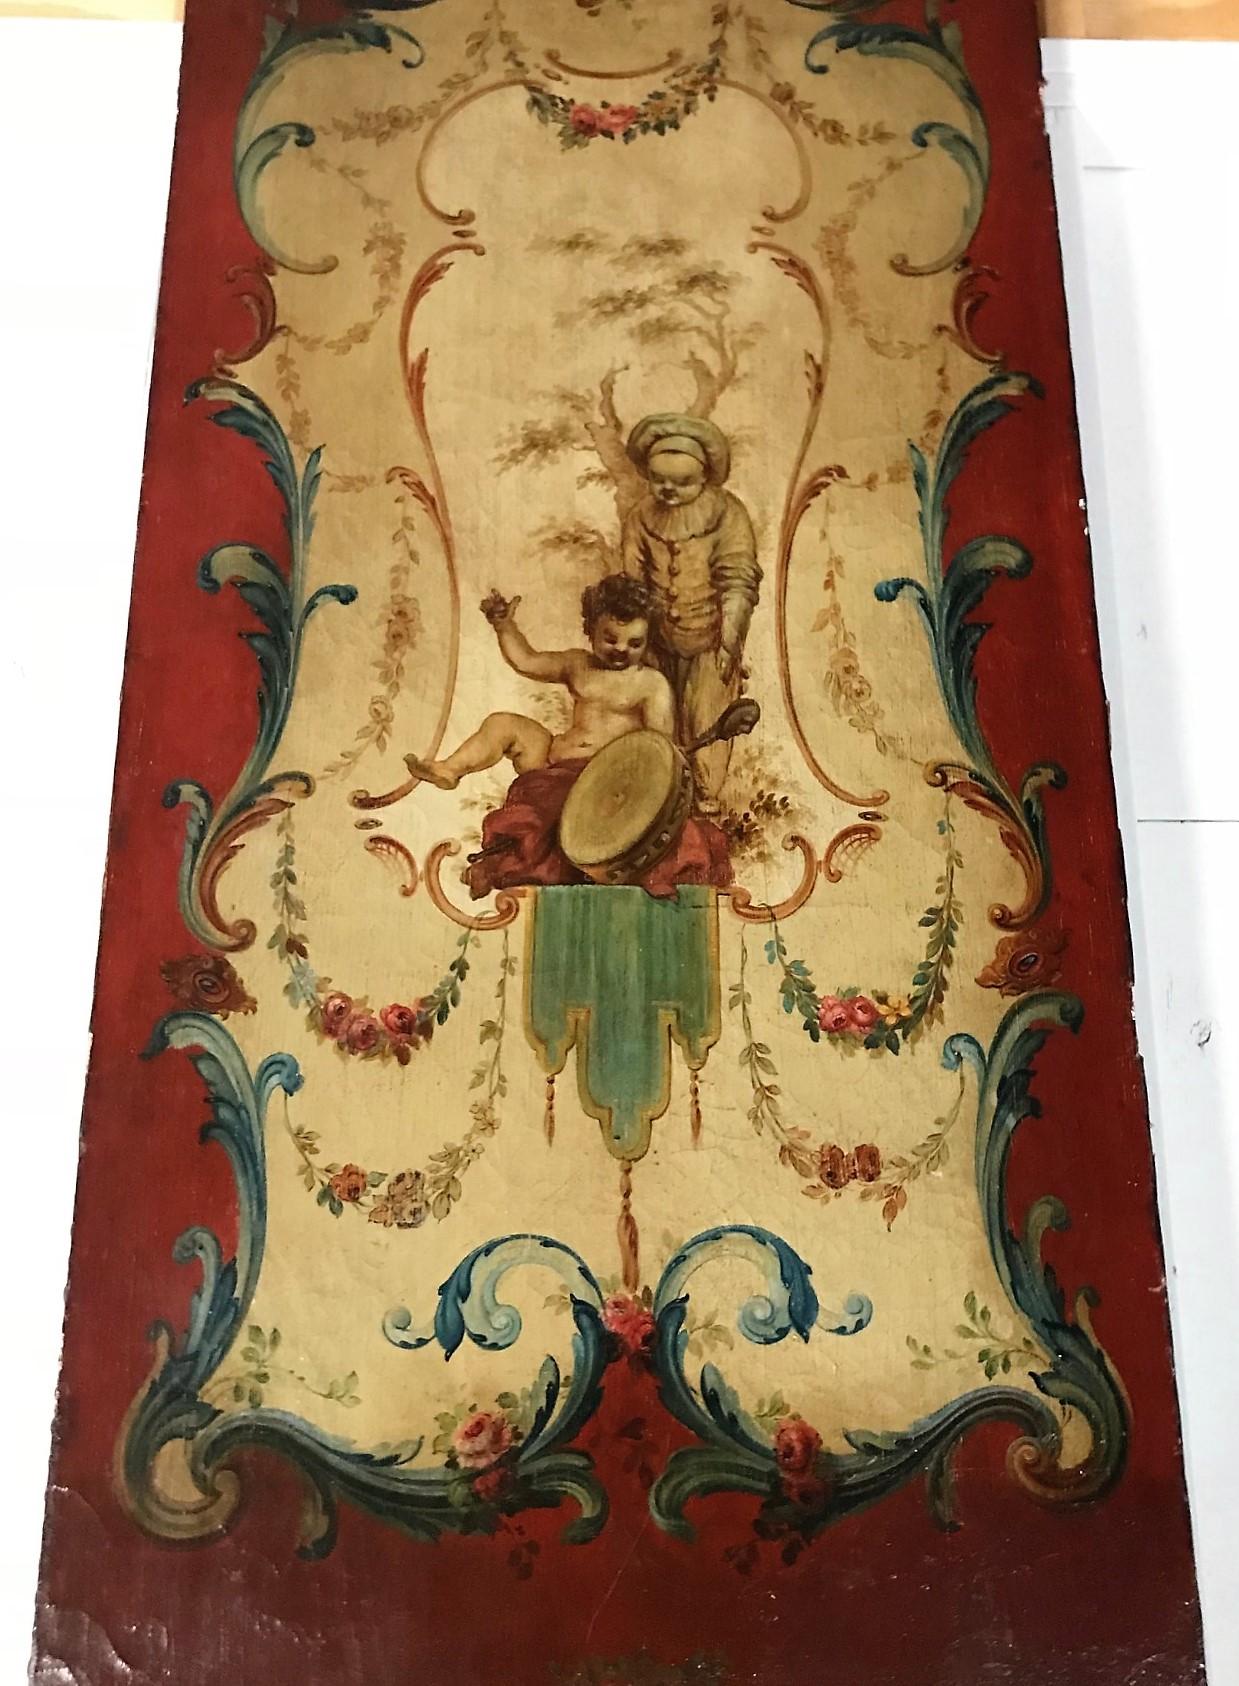 Finely detailed and original 19th century English oil on leather painted panels executed in a classical oriental motif and depicting landscapes with children and musical instruments. Each scene is painted within a stylized leaf border with floral